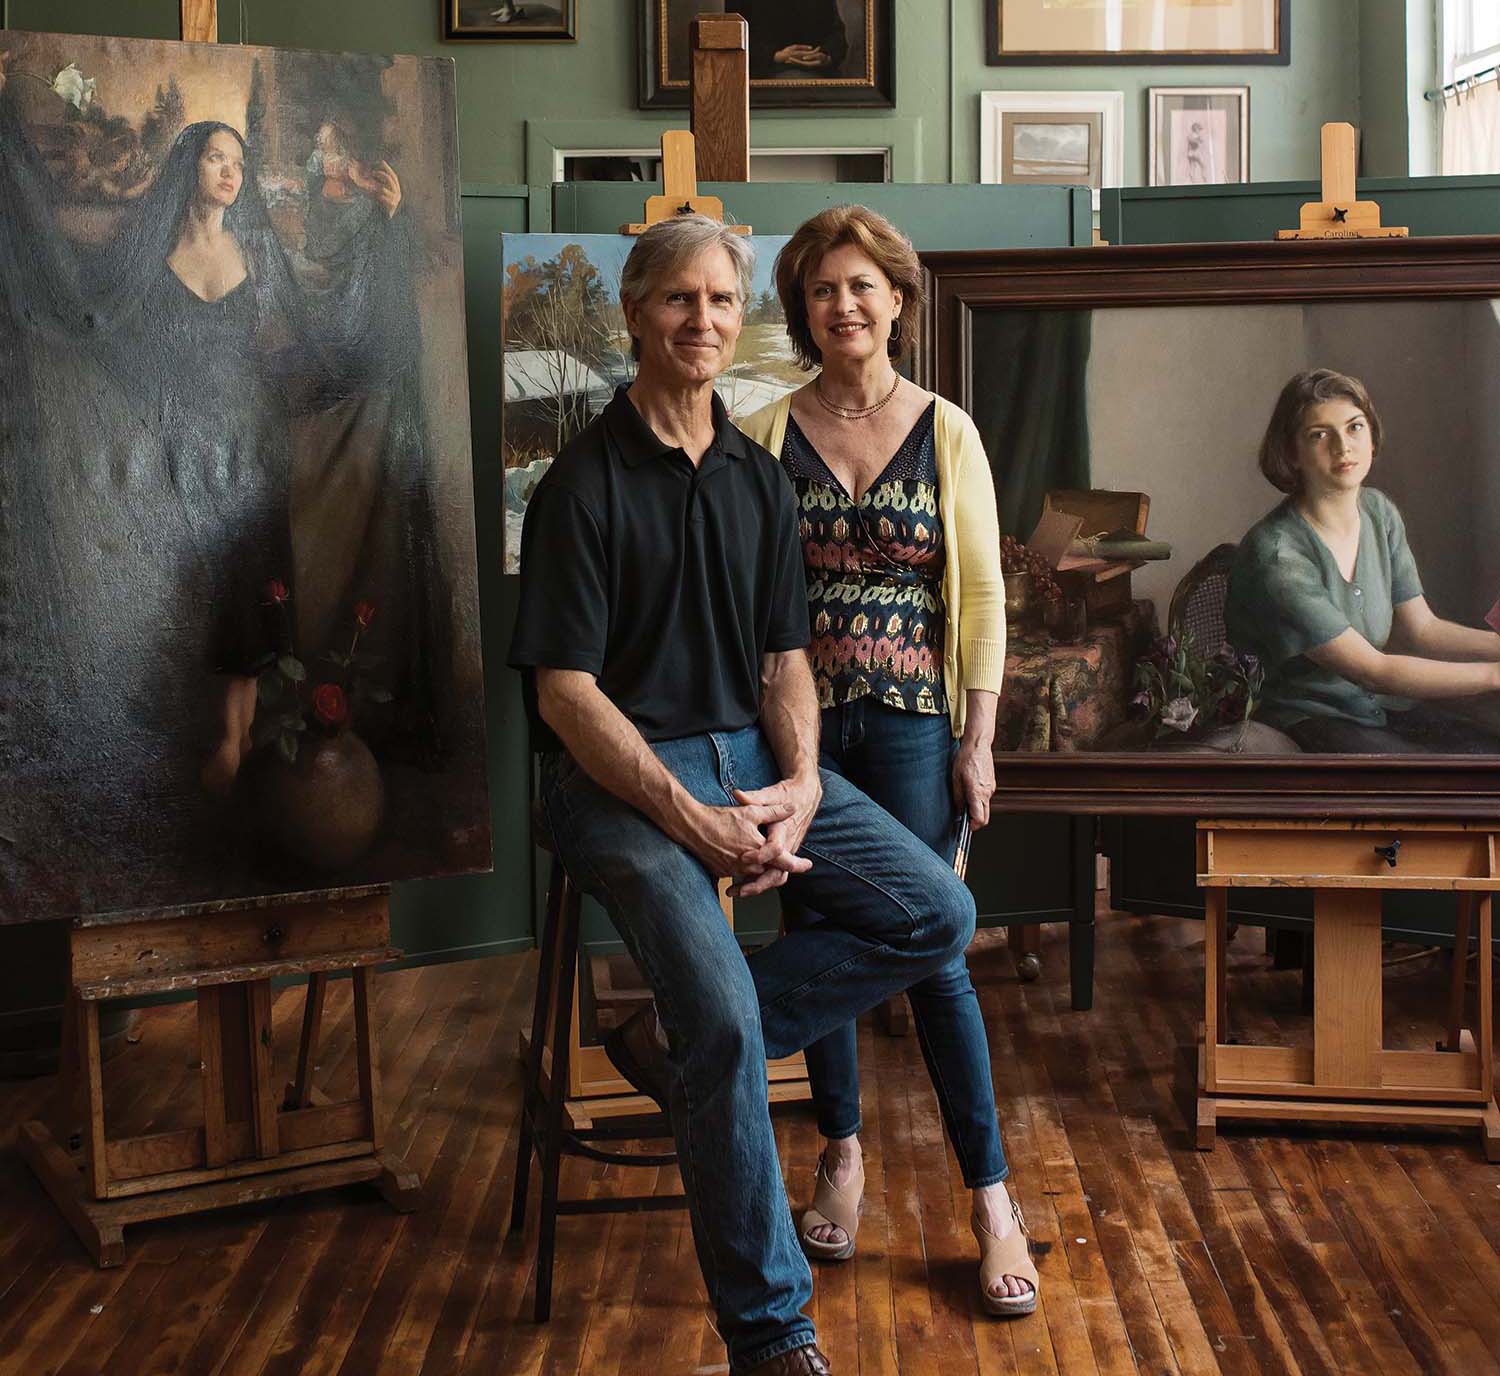 Their Romantic Summer Session Blended into a Lifetime of Artmaking